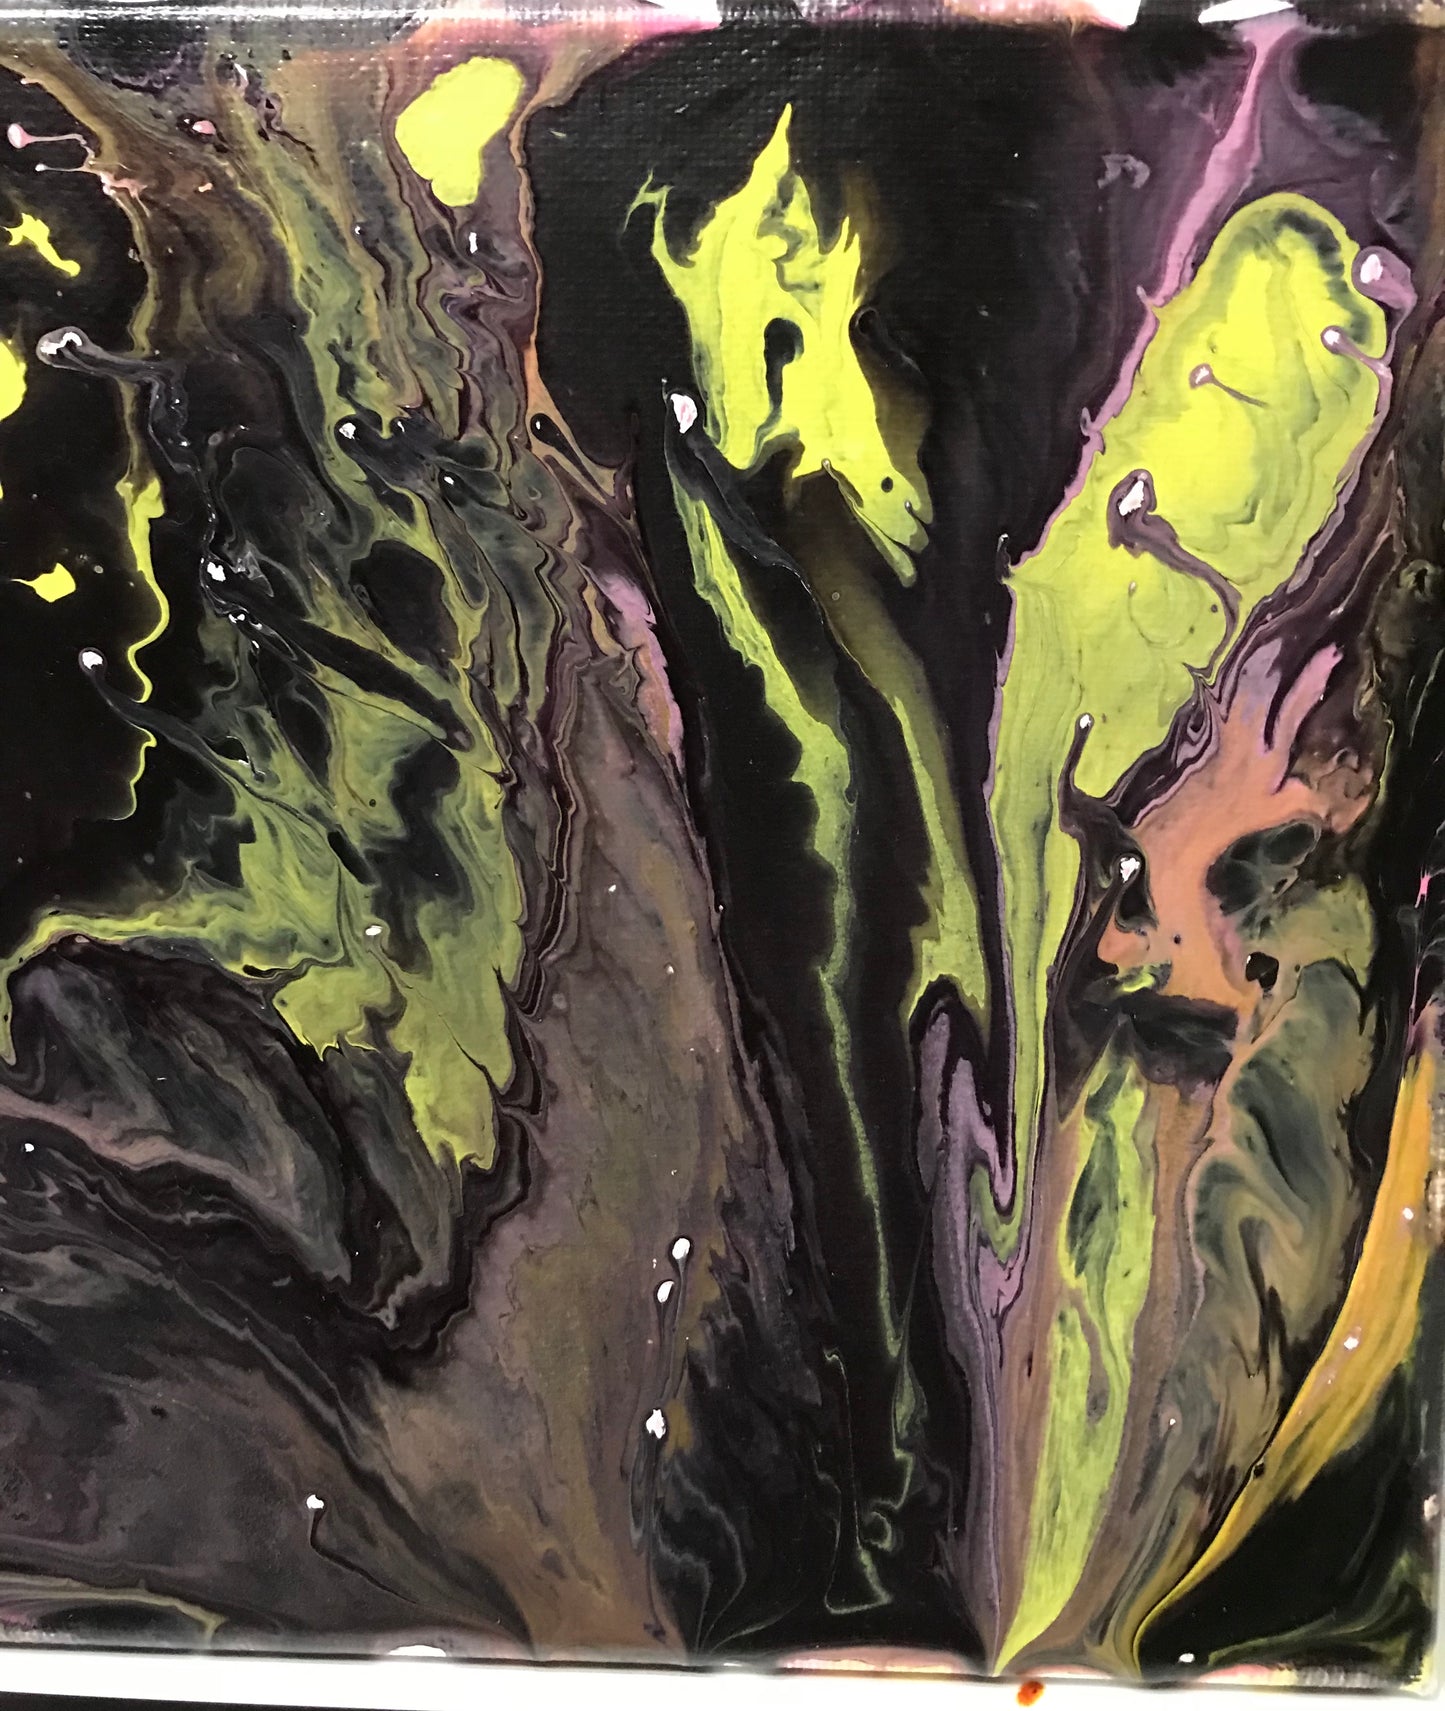 Sun, Dec 4th, 12-2p "Acrylic Poured" Private Kids Painting Party